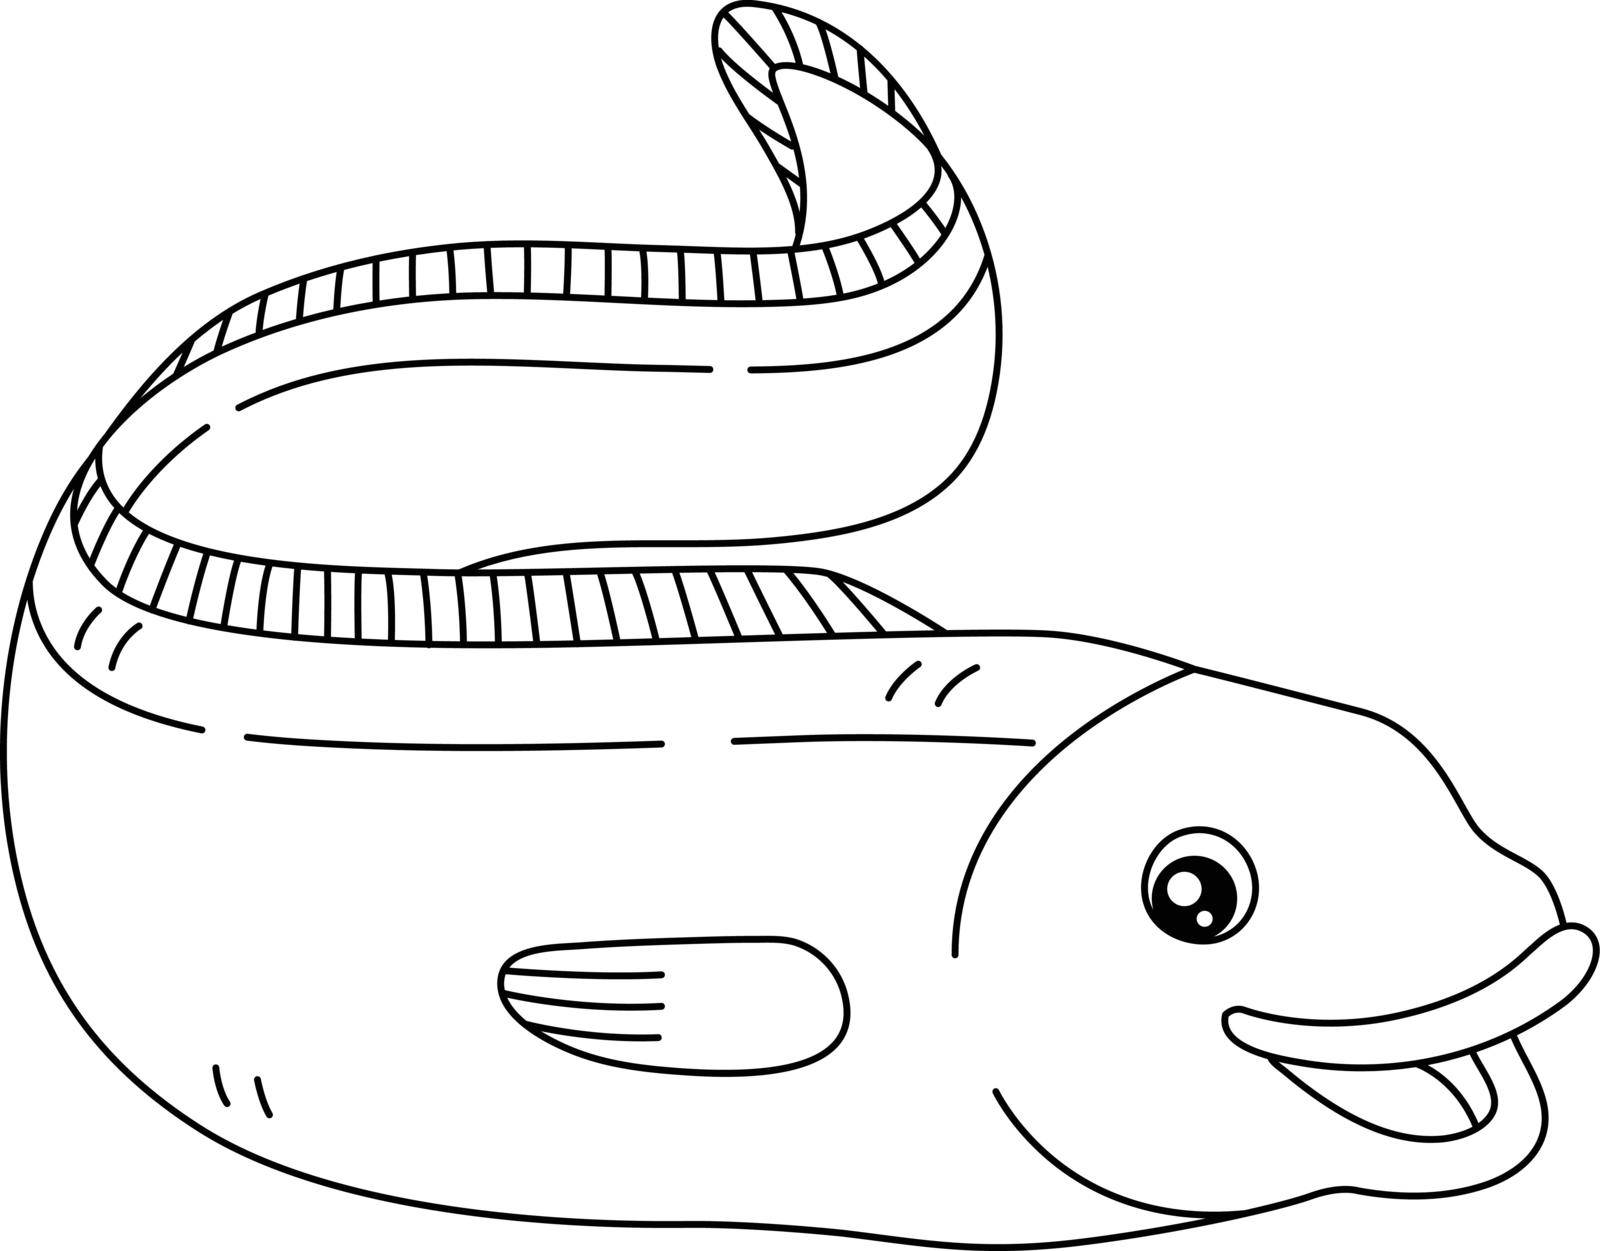 Eel Coloring Page Isolated for Kids by abbydesign